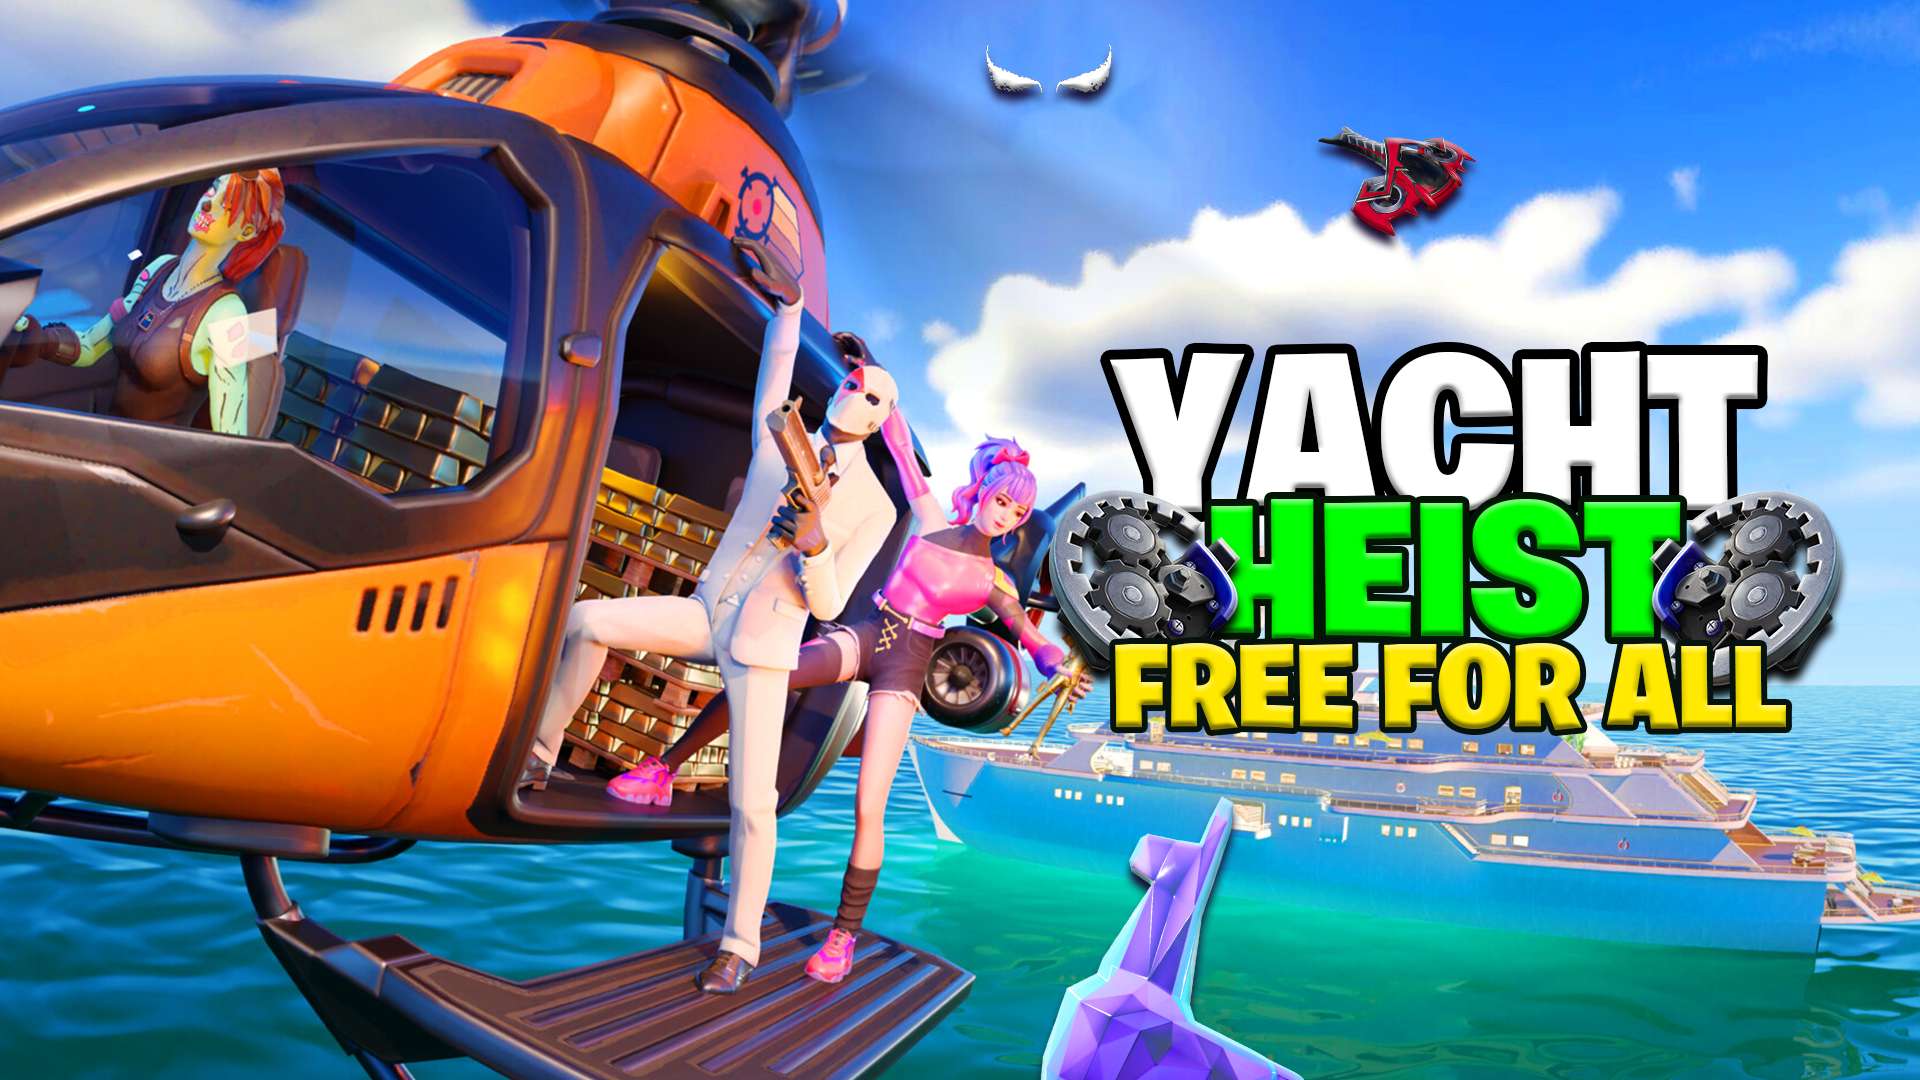 YACHT HEIST - FREE FOR ALL